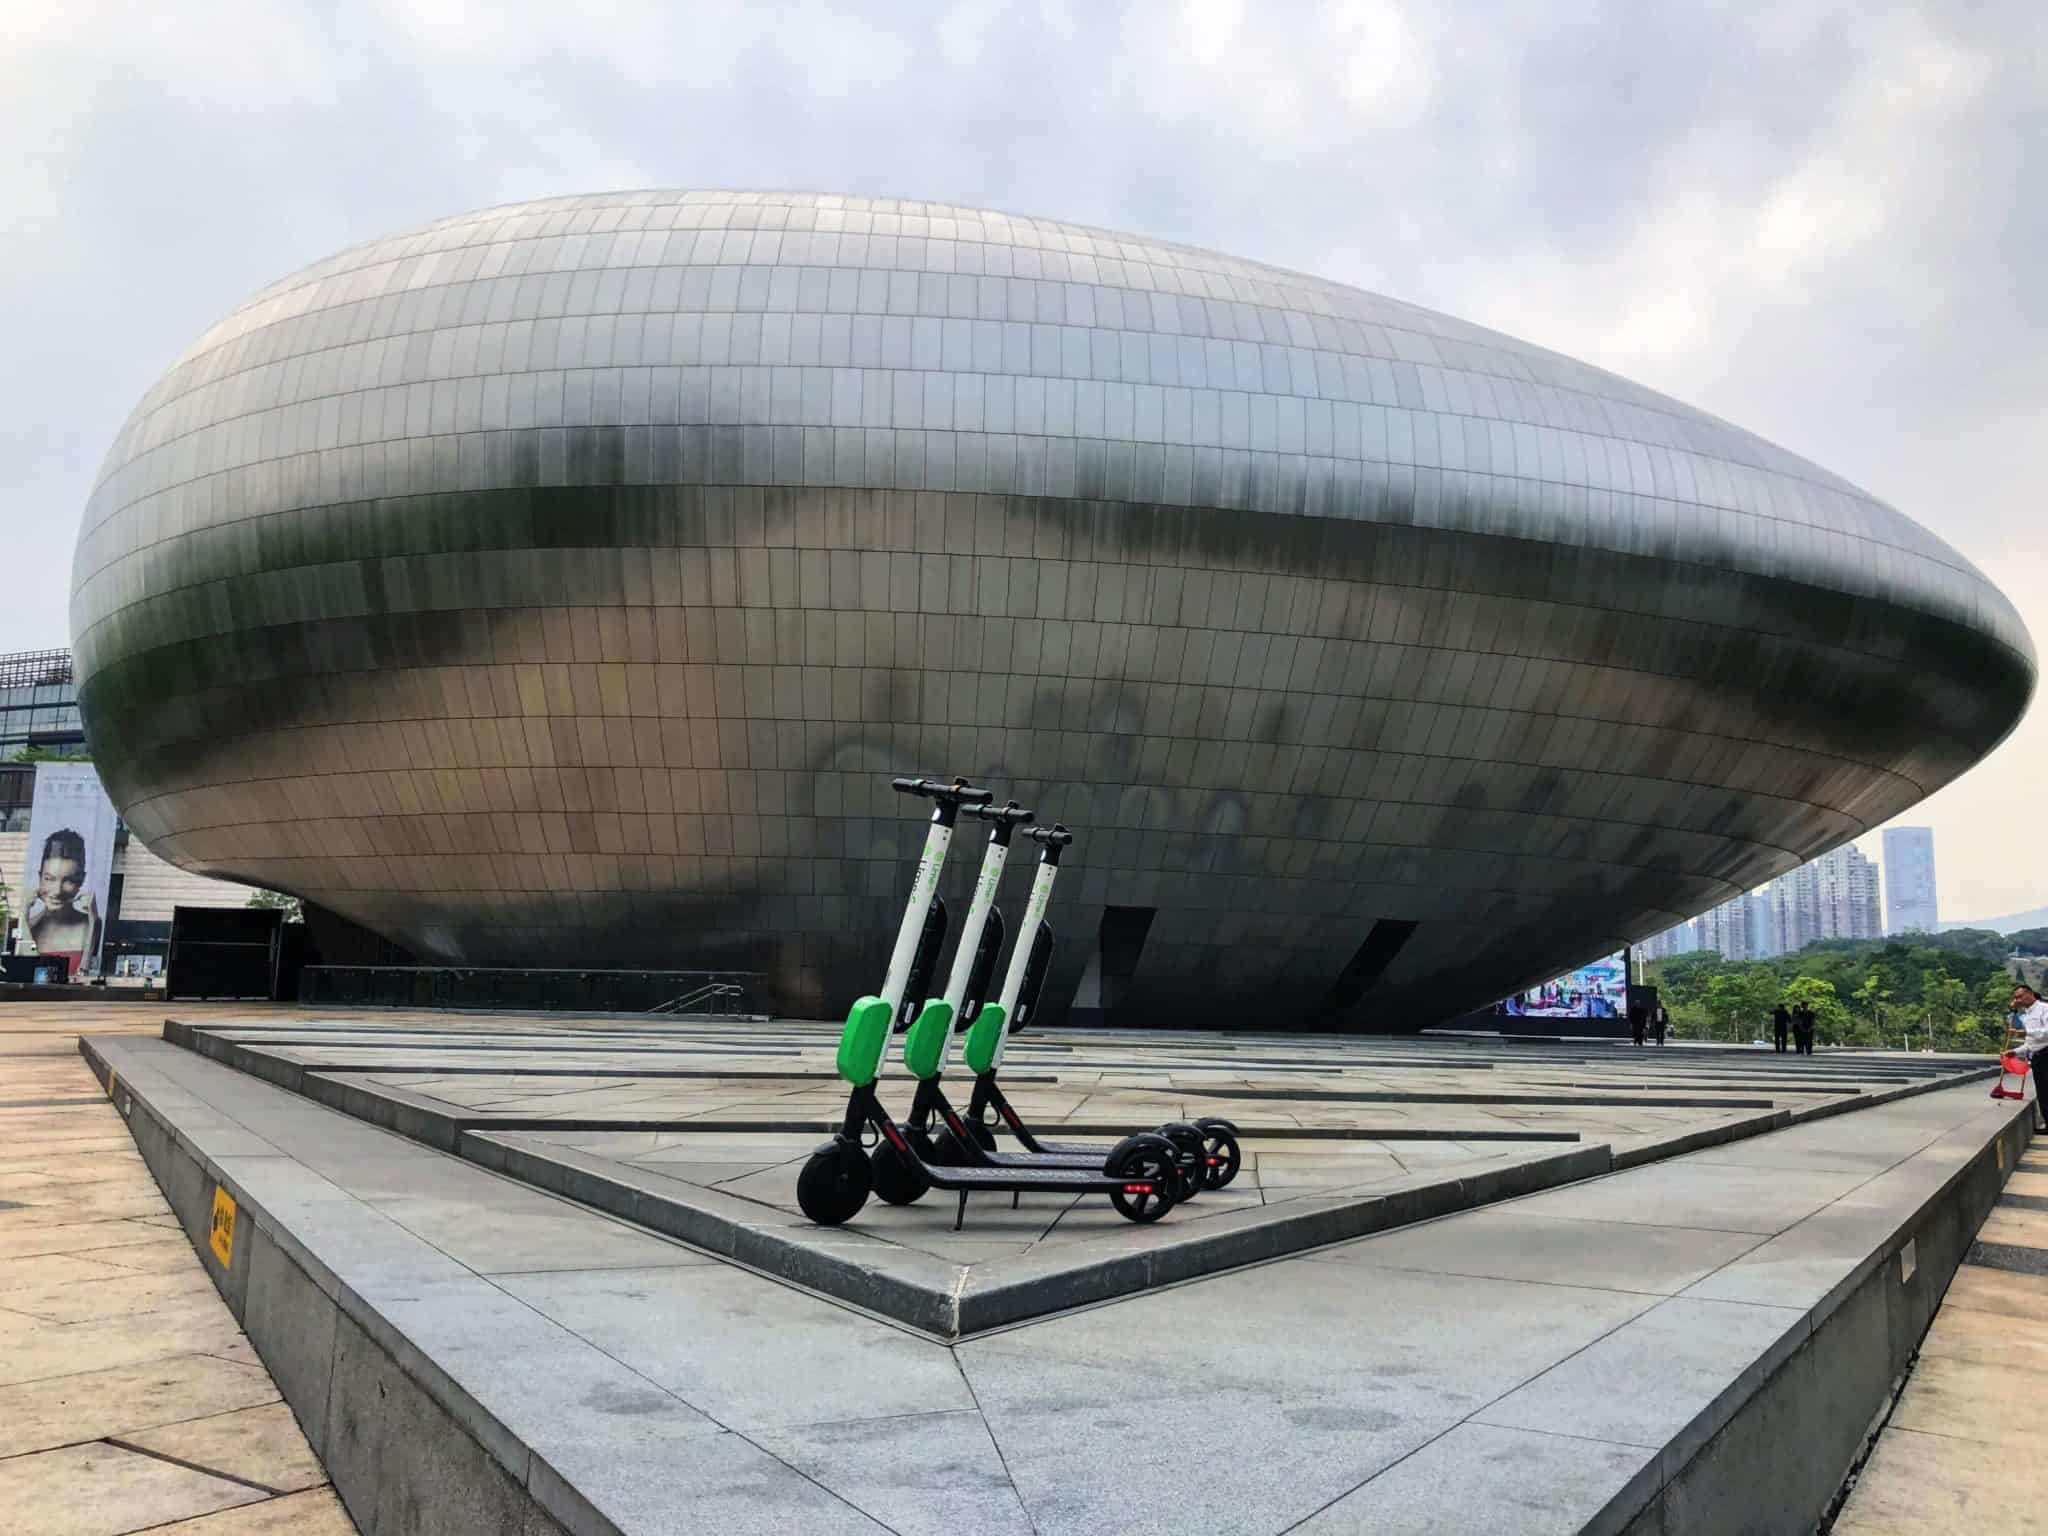 3 lime scooters in front of a sculpture